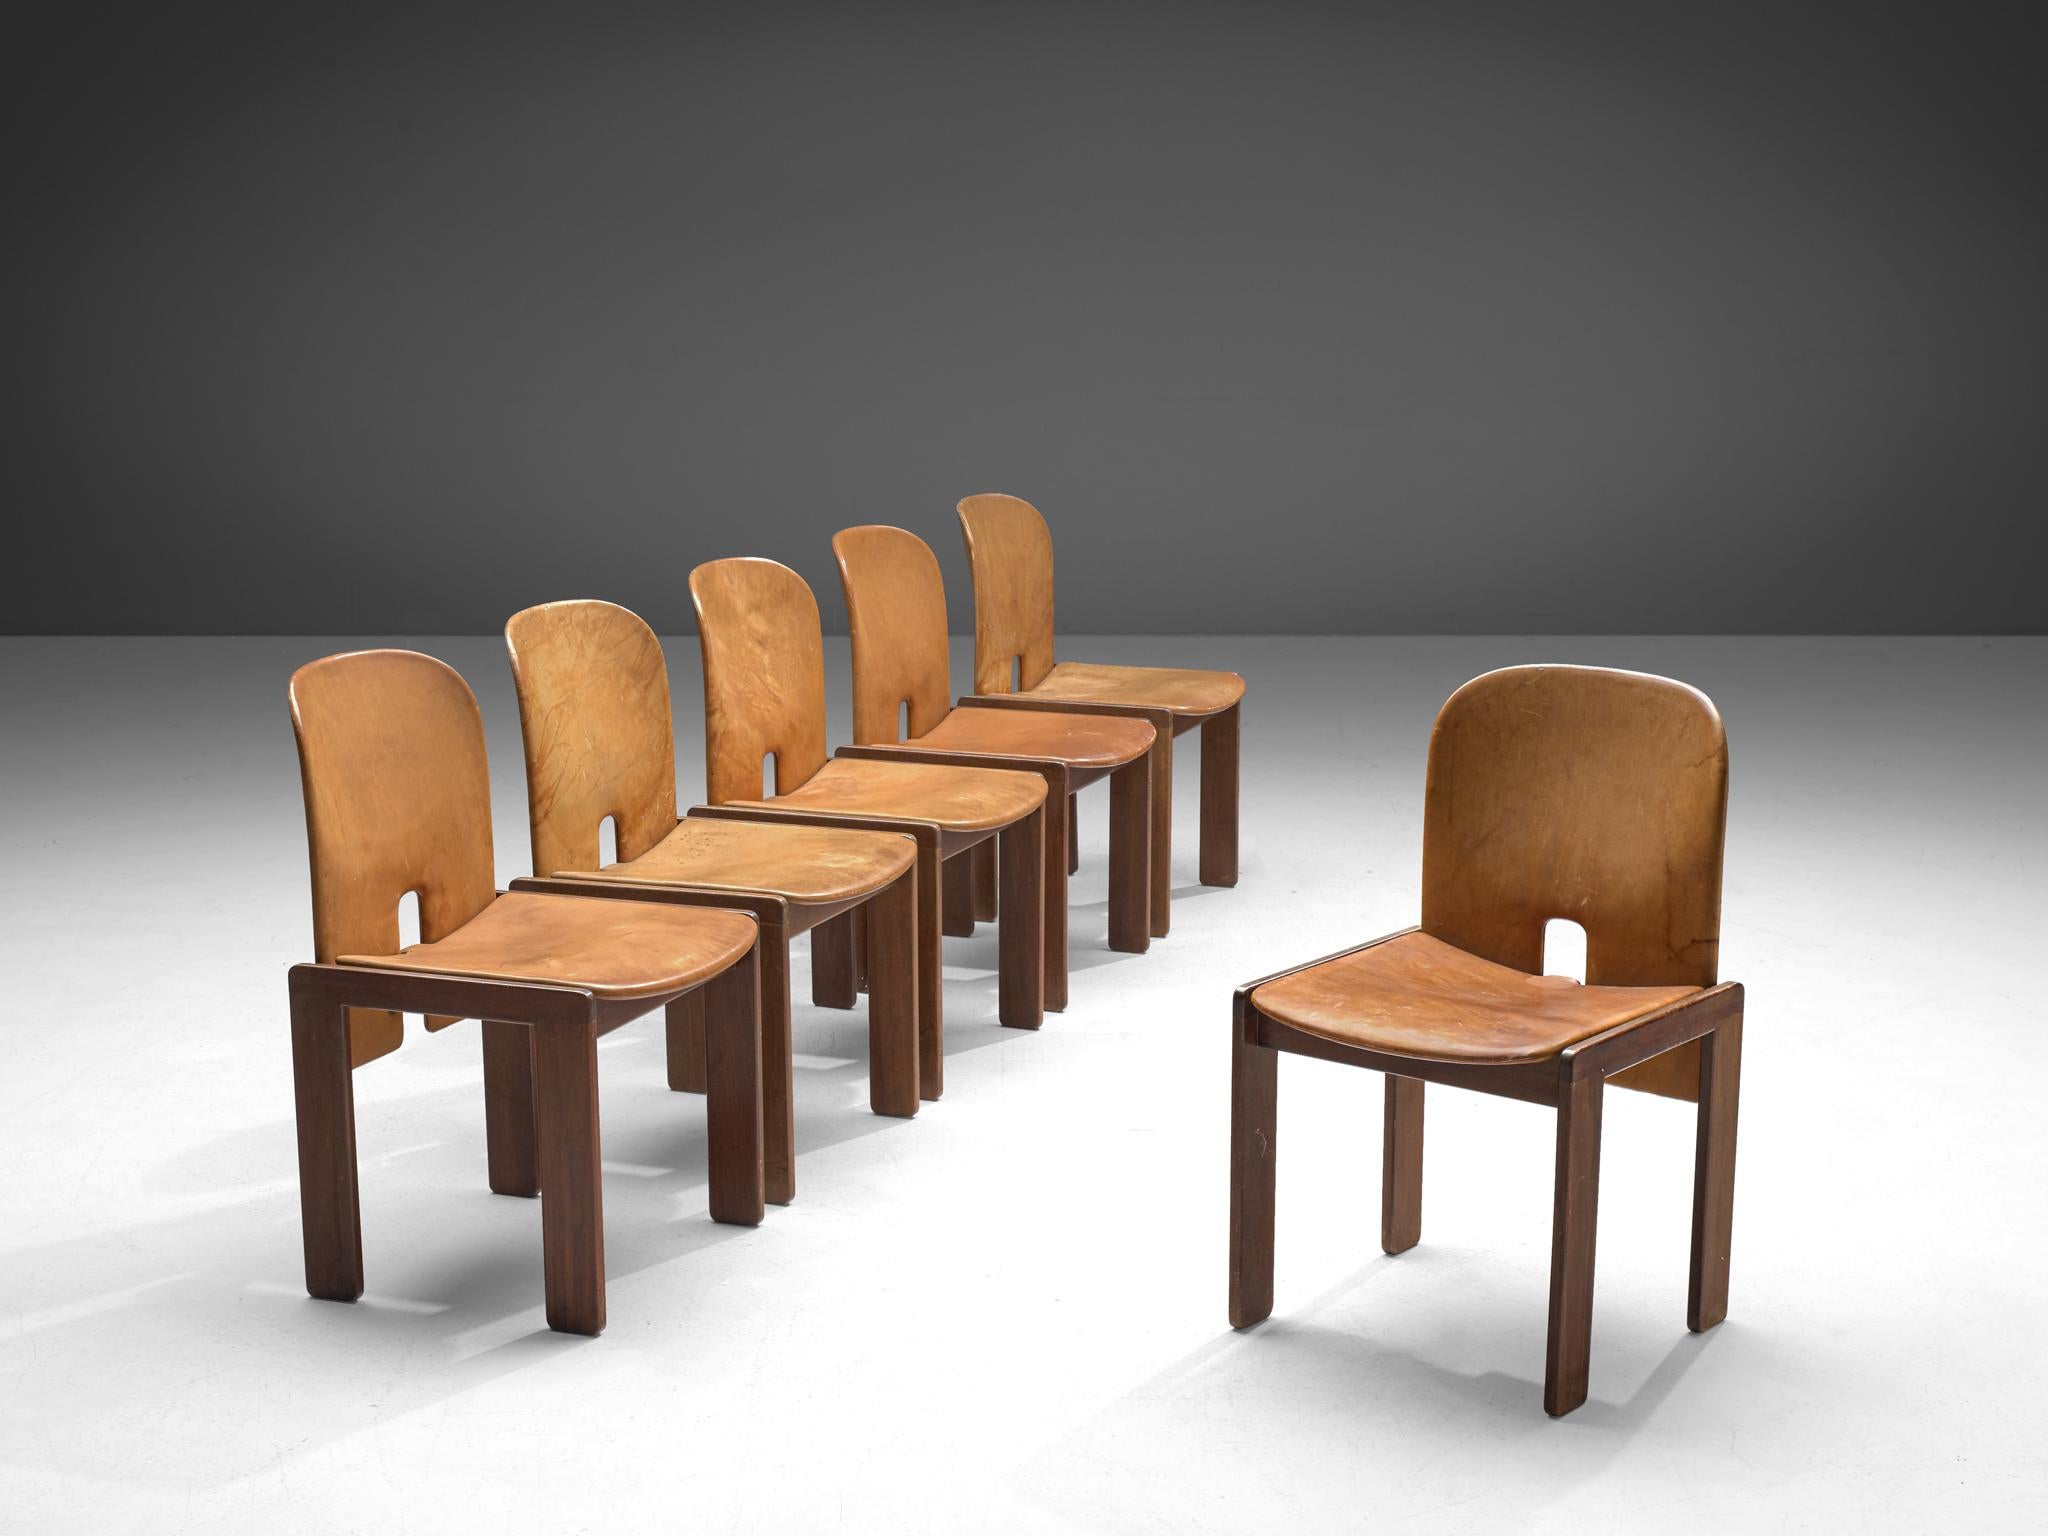 Afra & Tobia Scarpa for Cassina, set of 6 chairs model 121, leather and walnut, Italy, design 1965.

Set of six chairs by Italian designer couple Tobia and Afra Scarpa. These chairs have a cubic and architectural appearance. The base consist of